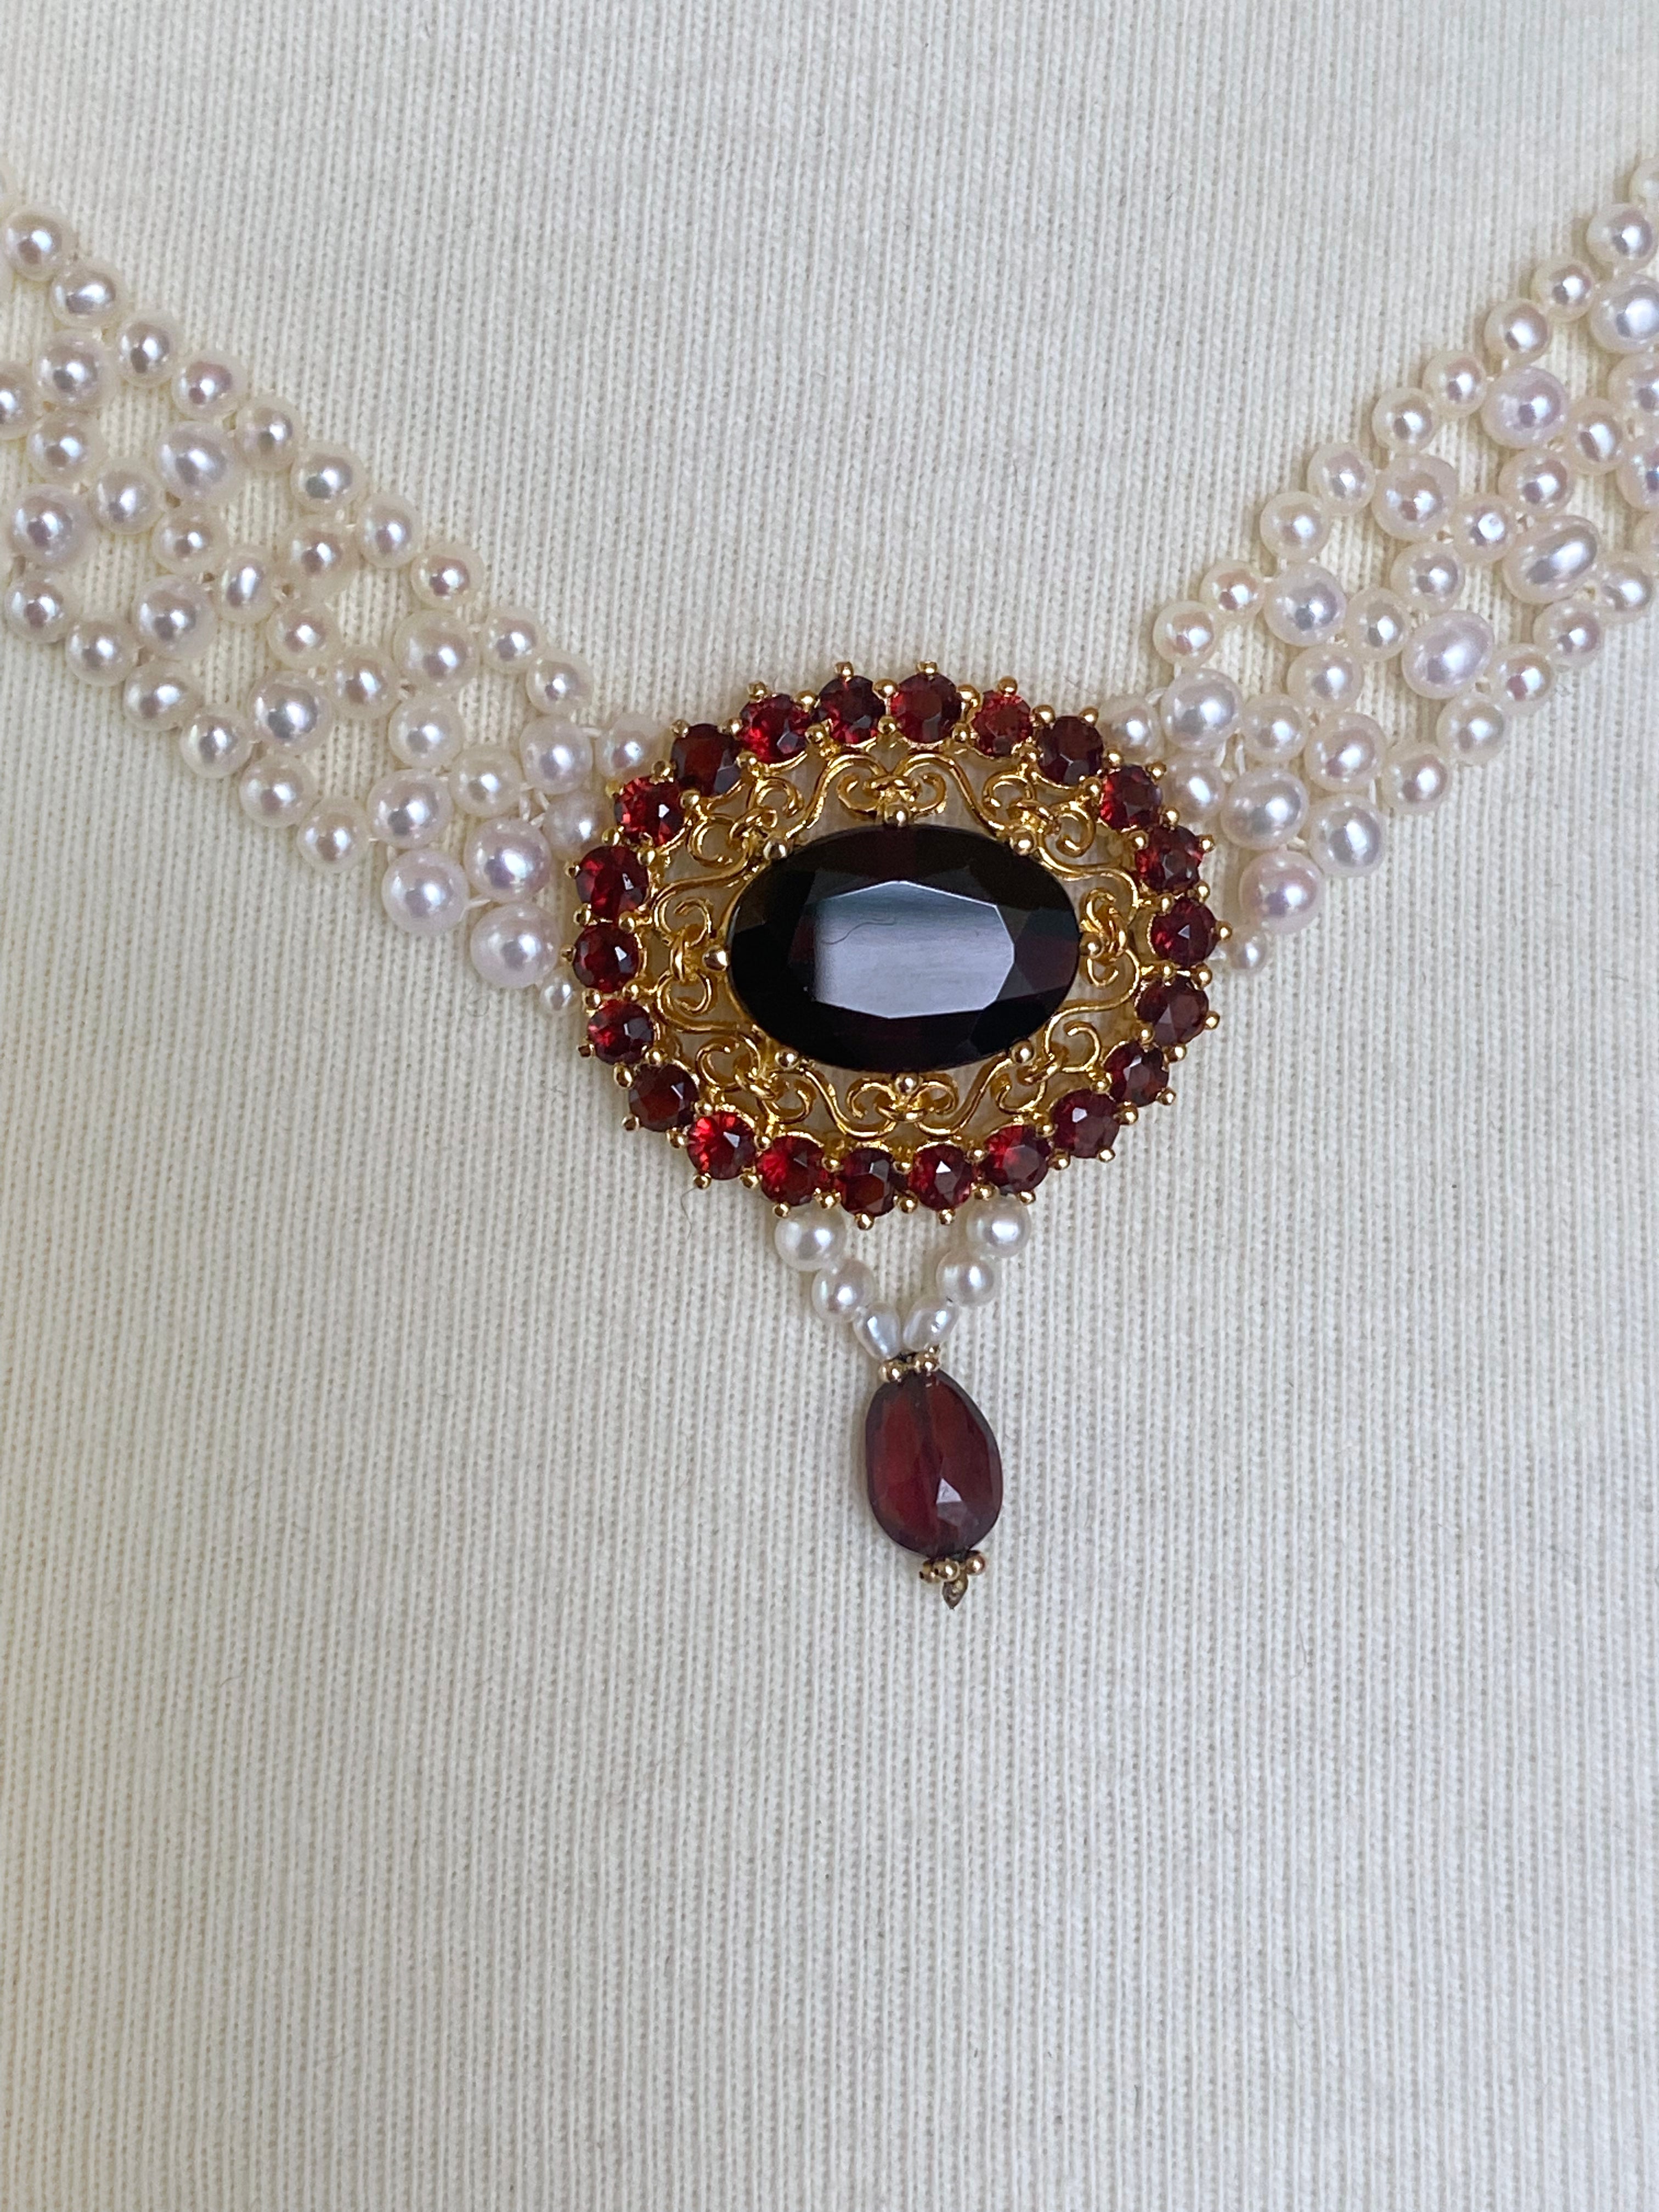 Artisan Marina J. Pearl Woven Necklace with Gold Plated Vintage Garnet Brooch